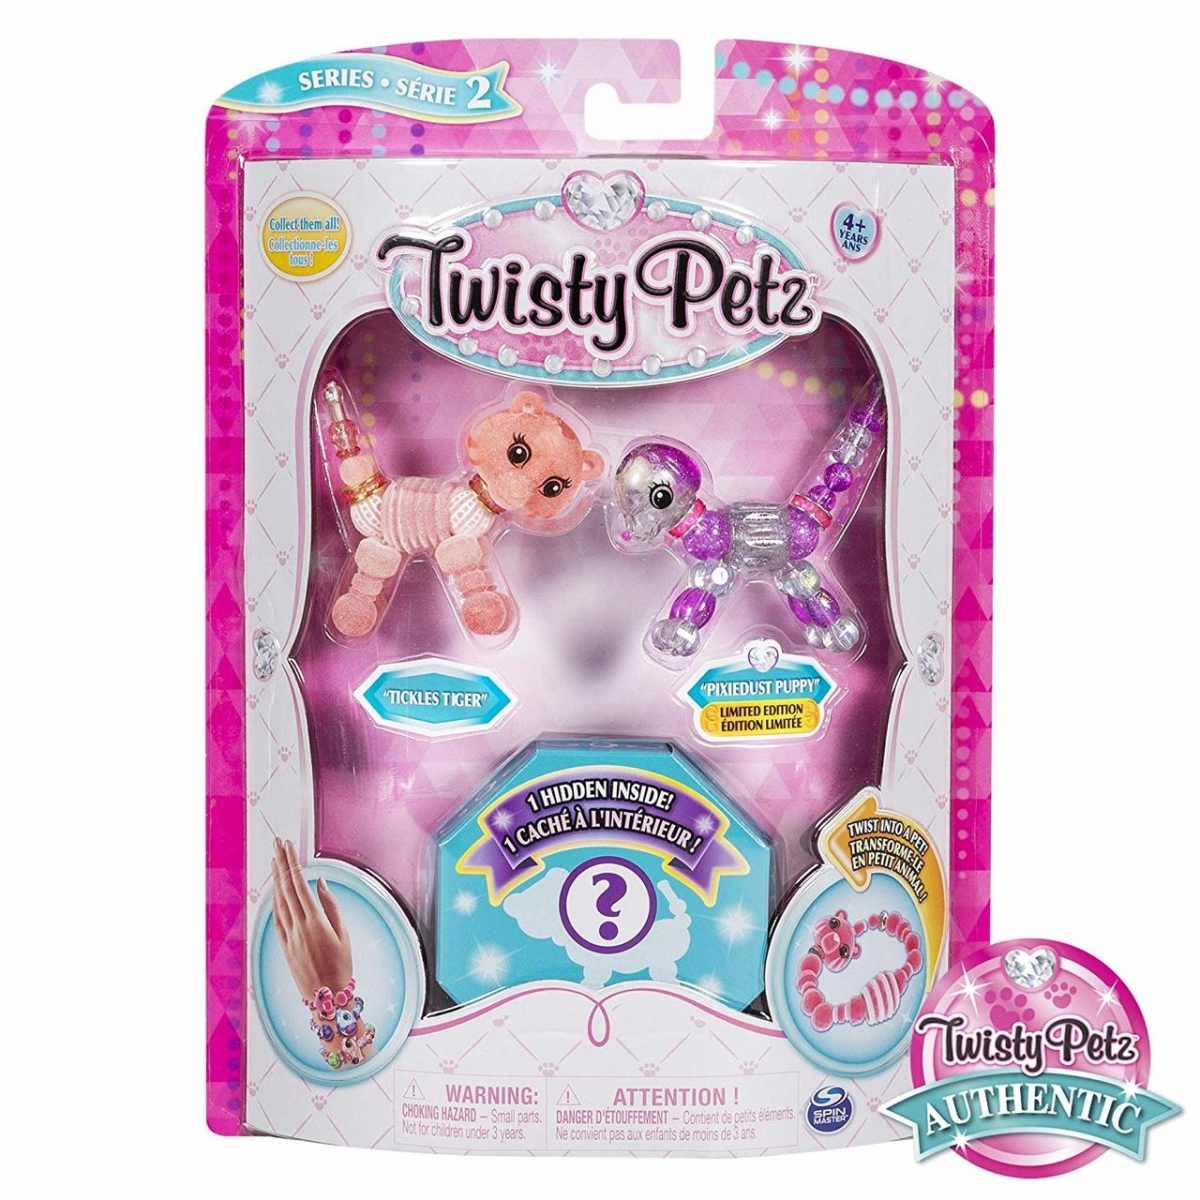 30373005 Mystery One Tickles Tiger & Pixiedust Puppy Twisty Petz - Pack Of 2